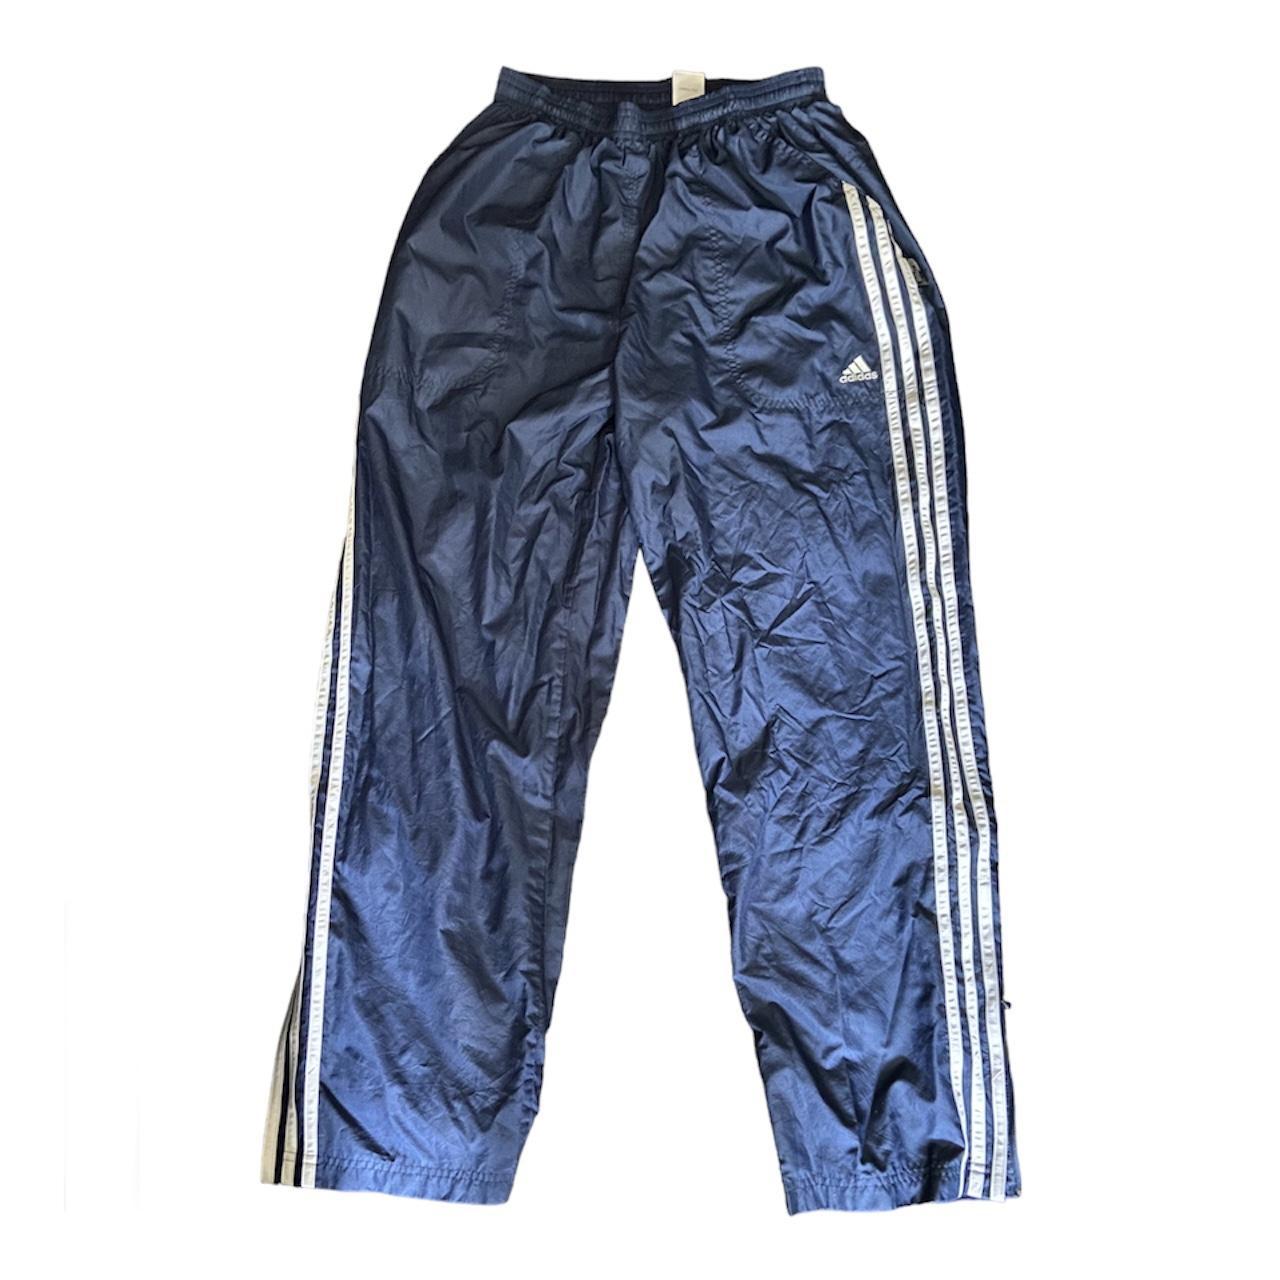 Adidas Men's Navy and White Trousers | Depop